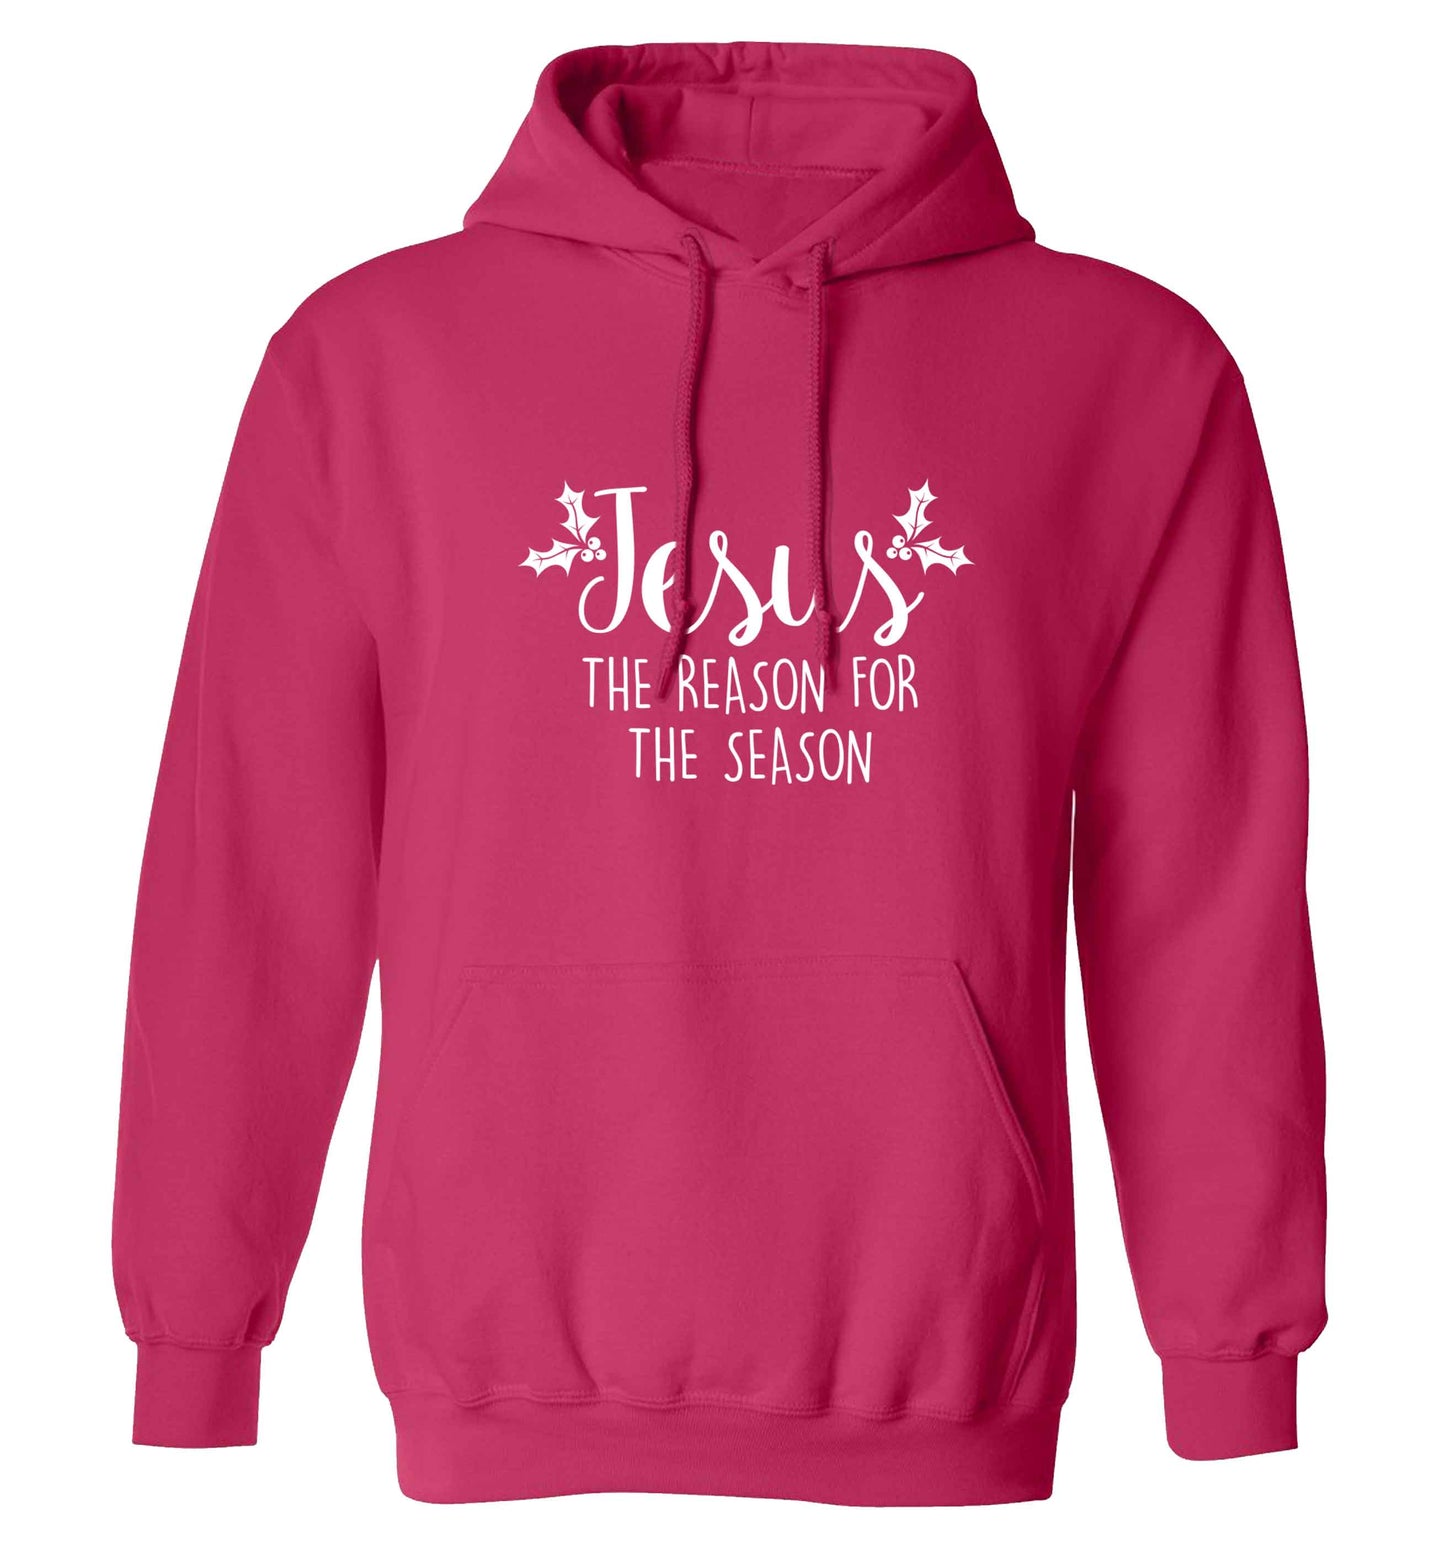 Jesus the reason for the season adults unisex pink hoodie 2XL